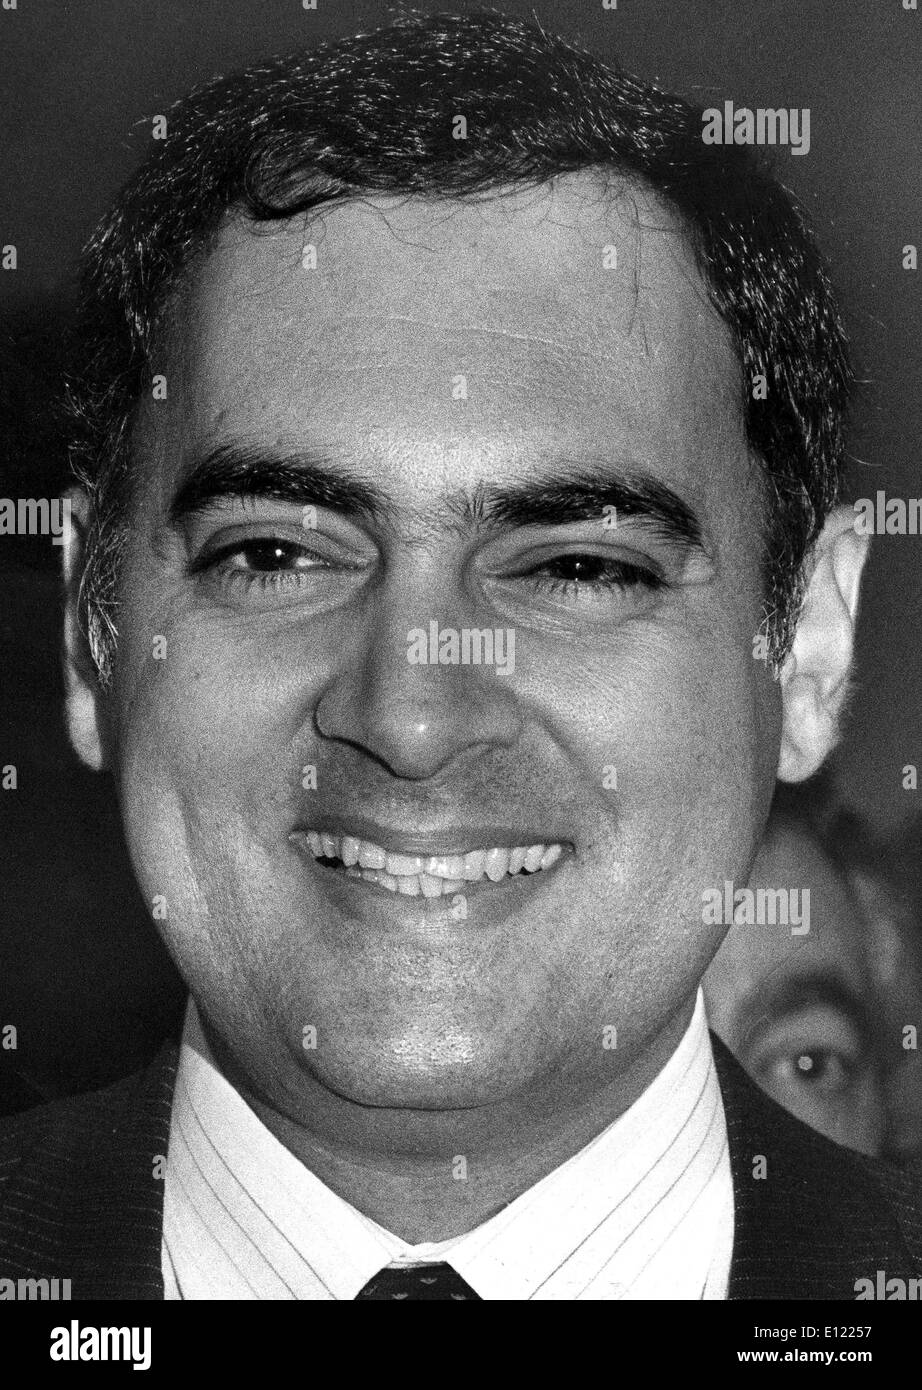 Feb 02, 1983; New Delhi, India; The son of Prime Minister Indira Gandhi, RAJIV GANDHI, was named a General Setary of her Gove Stock Photo